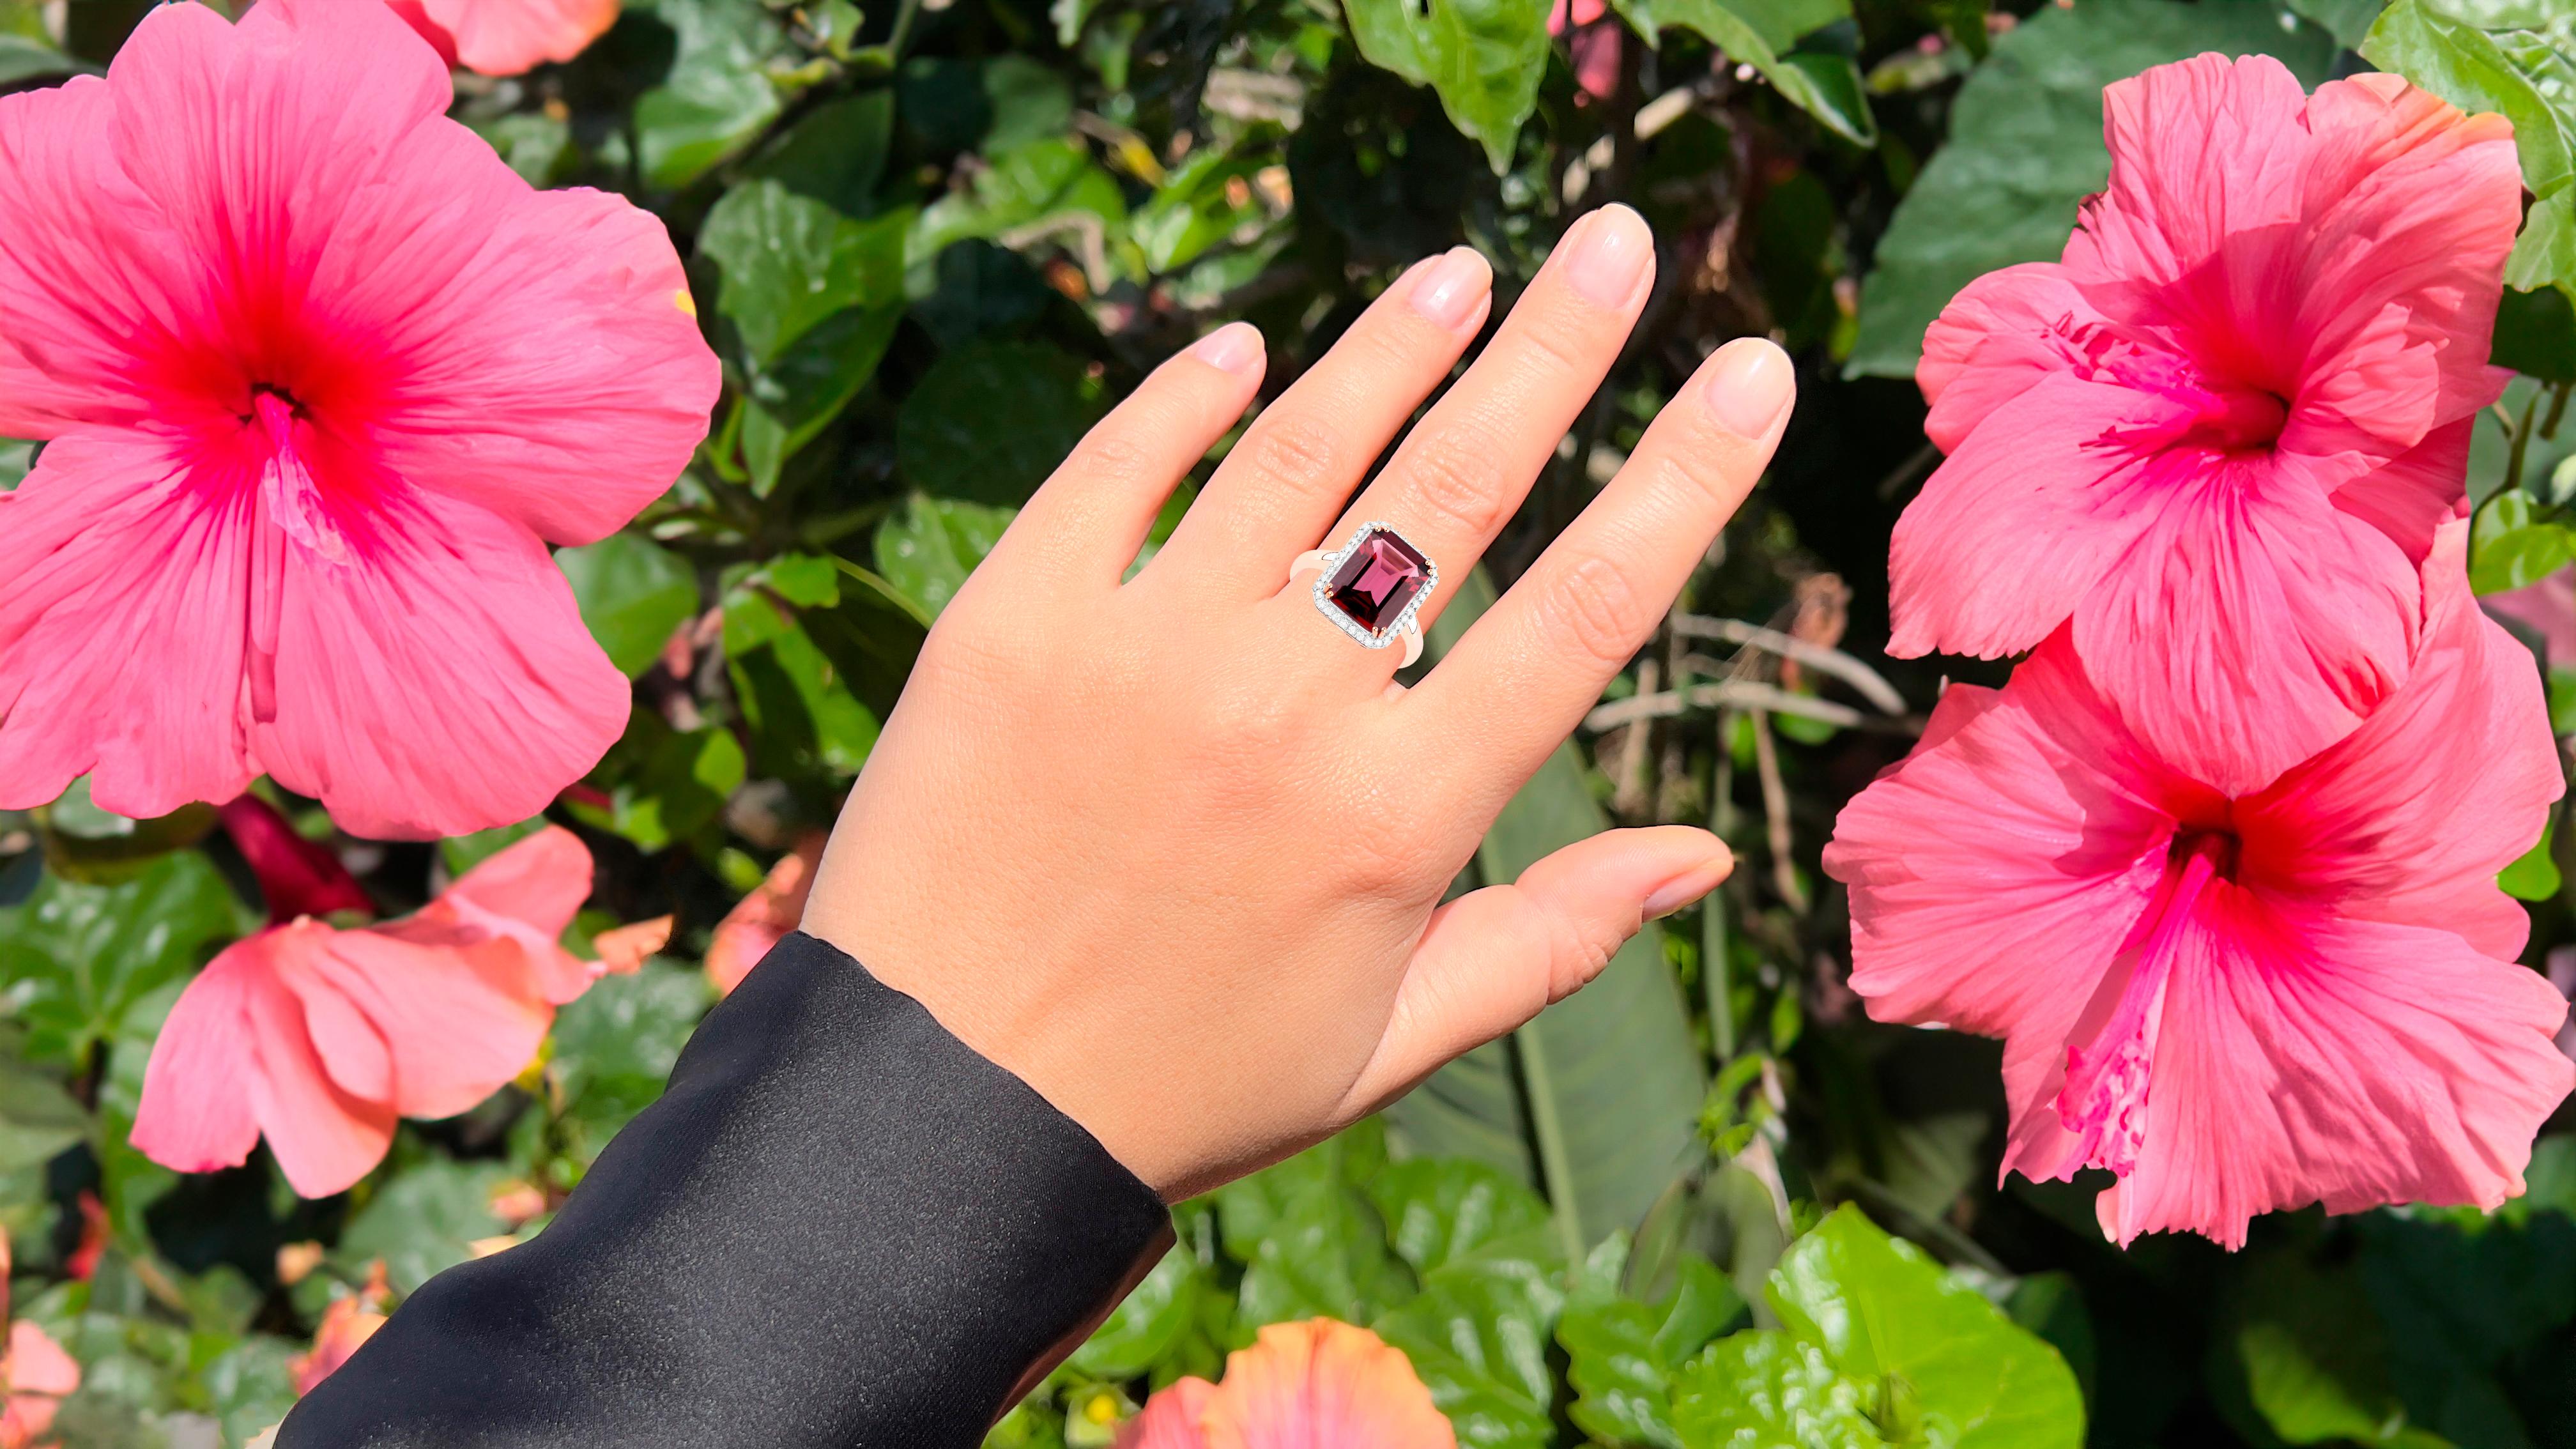 It comes with the Gemological Appraisal by GIA GG/AJP
All Gemstones are Natural
Rhodolite Garnet = 5.74 Carat
36 Diamonds = 0.23 Carats
Metal: 14K Rose Gold
Ring Size: 7* US
*It can be resized complimentary